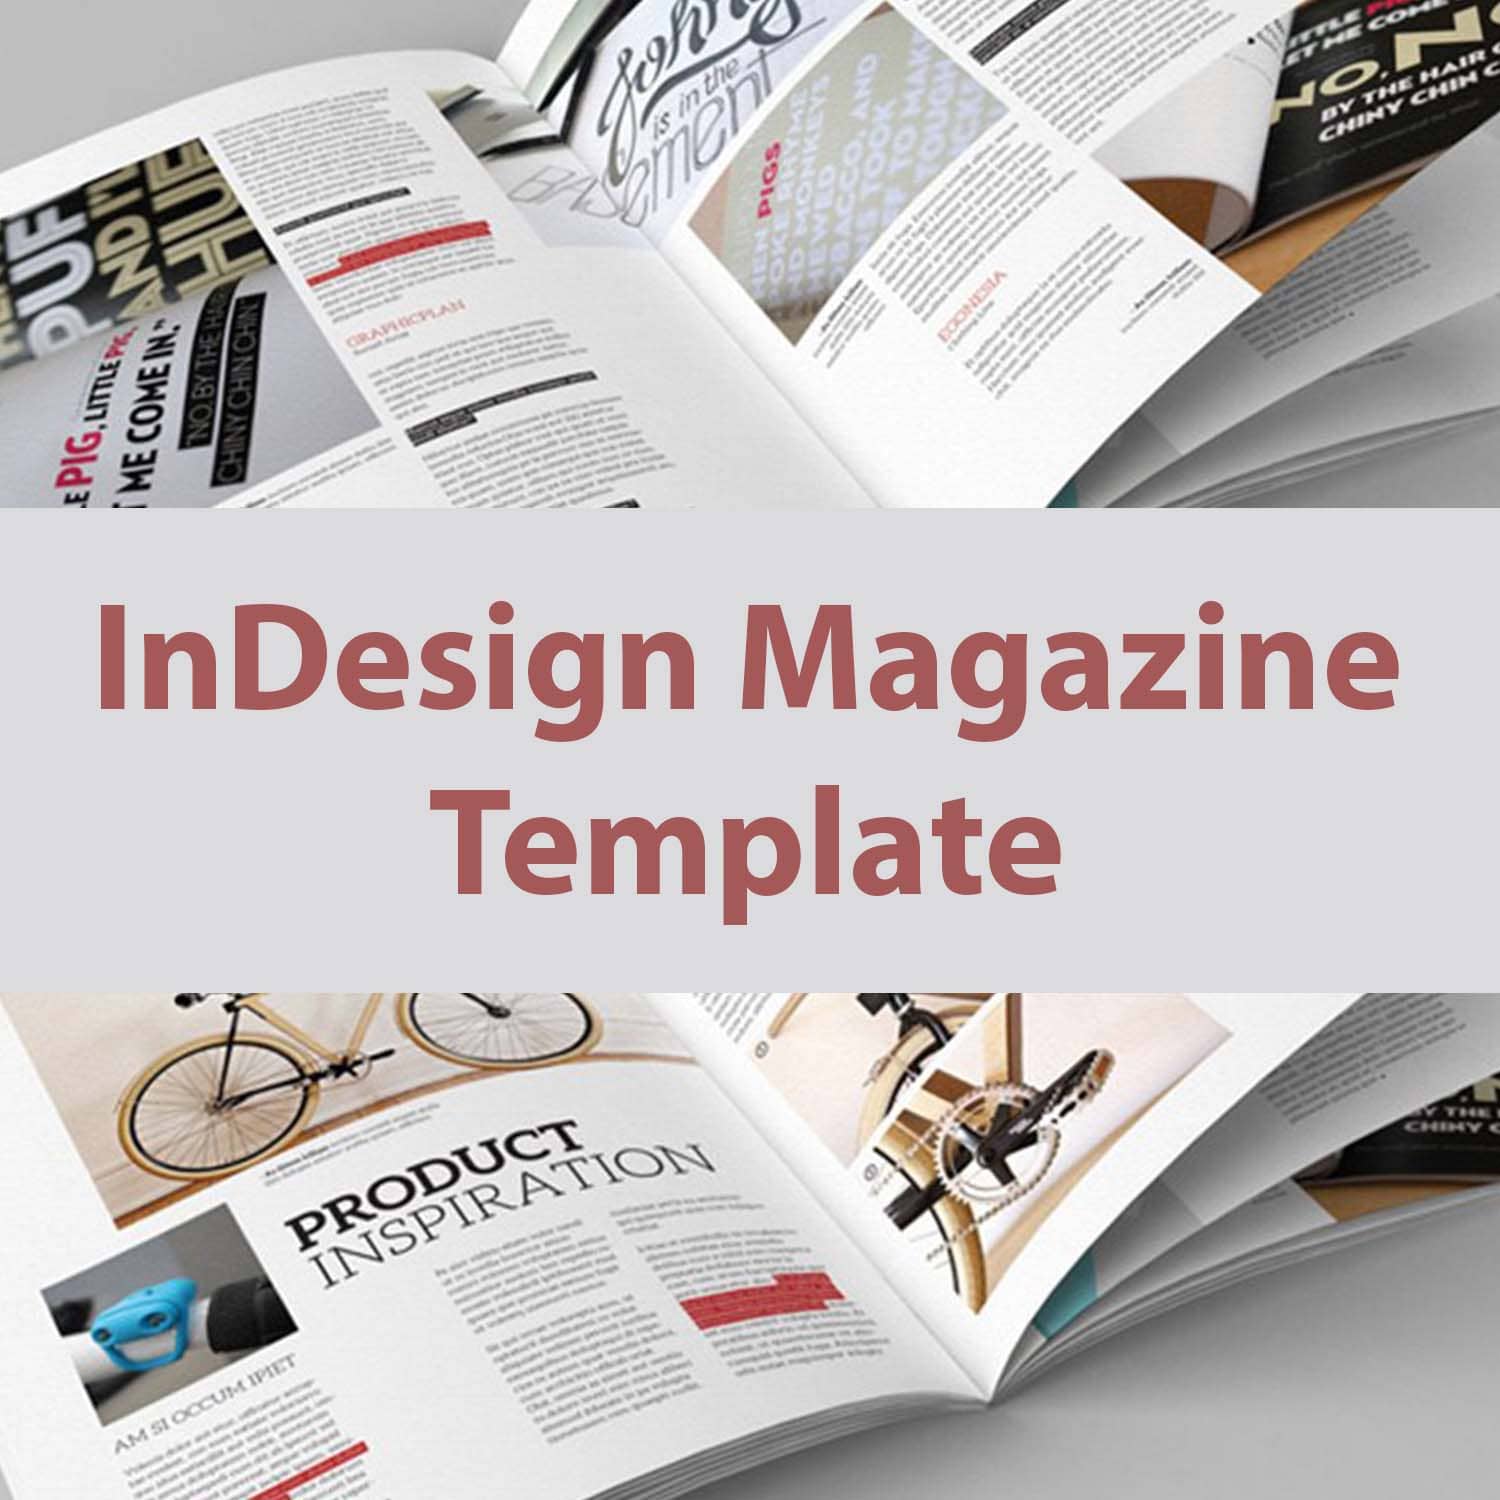 indesign magazine template cover